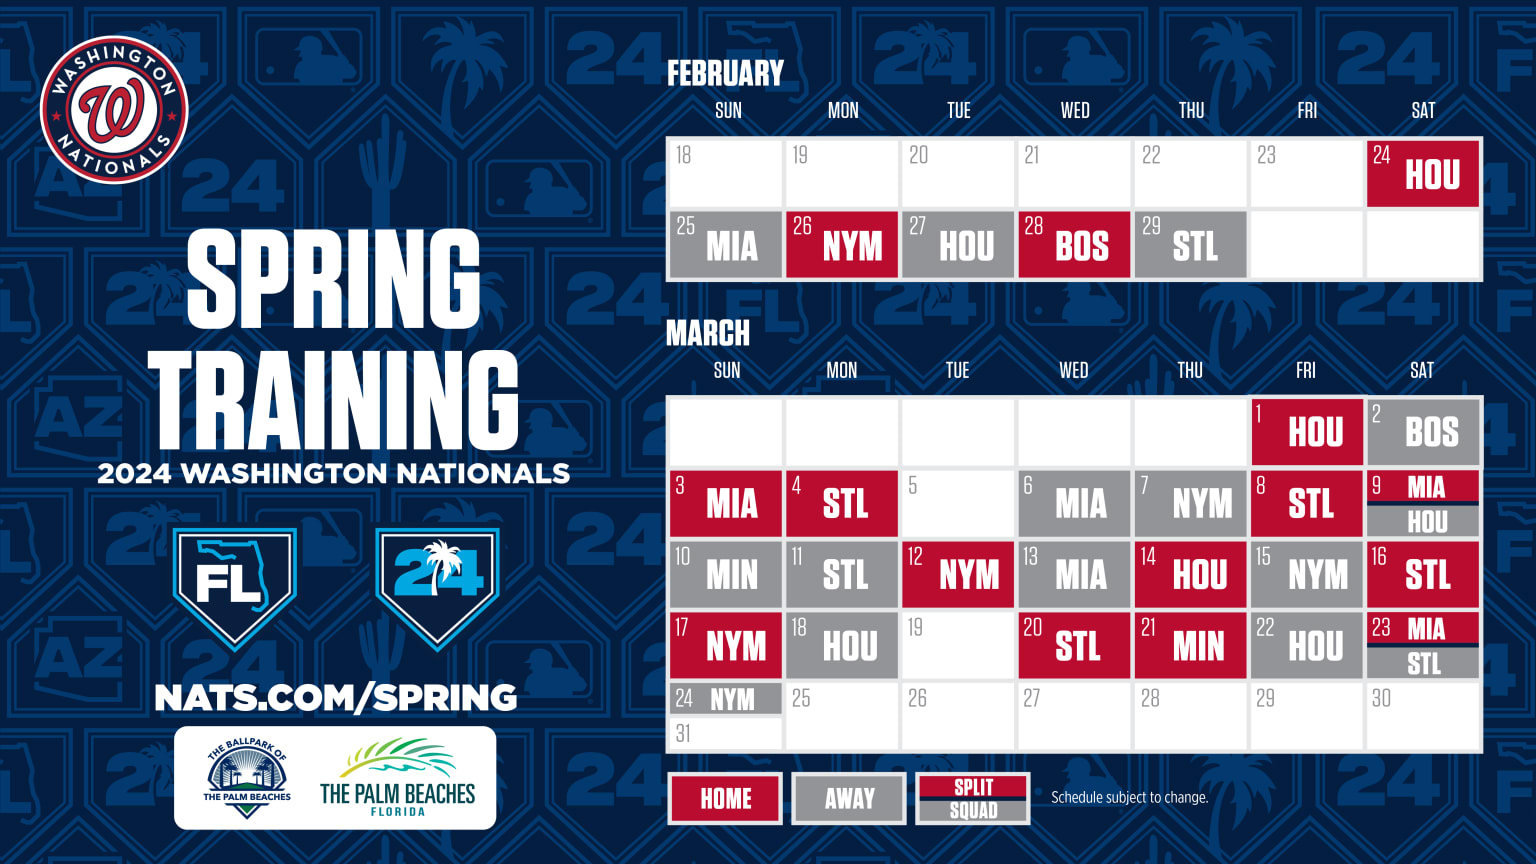 Detroit Tigers announce 2024 Spring Training schedule